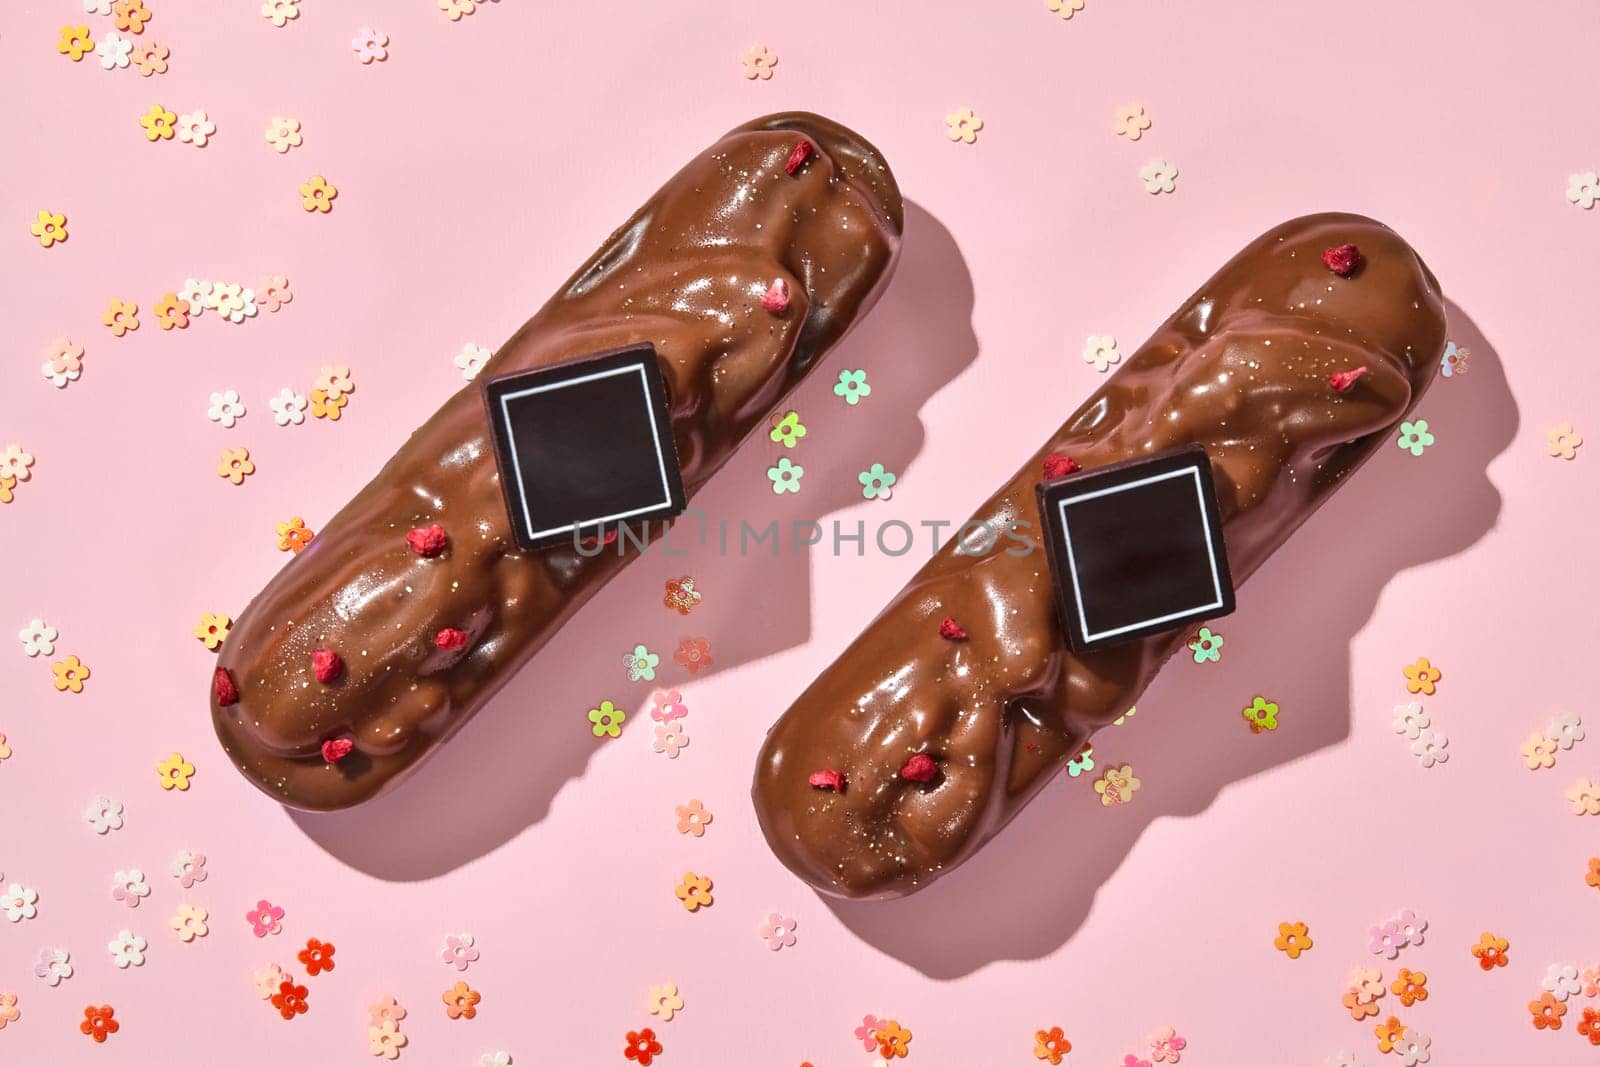 Chocolate-covered pecan bars with berry sprinkles on pink by nazarovsergey